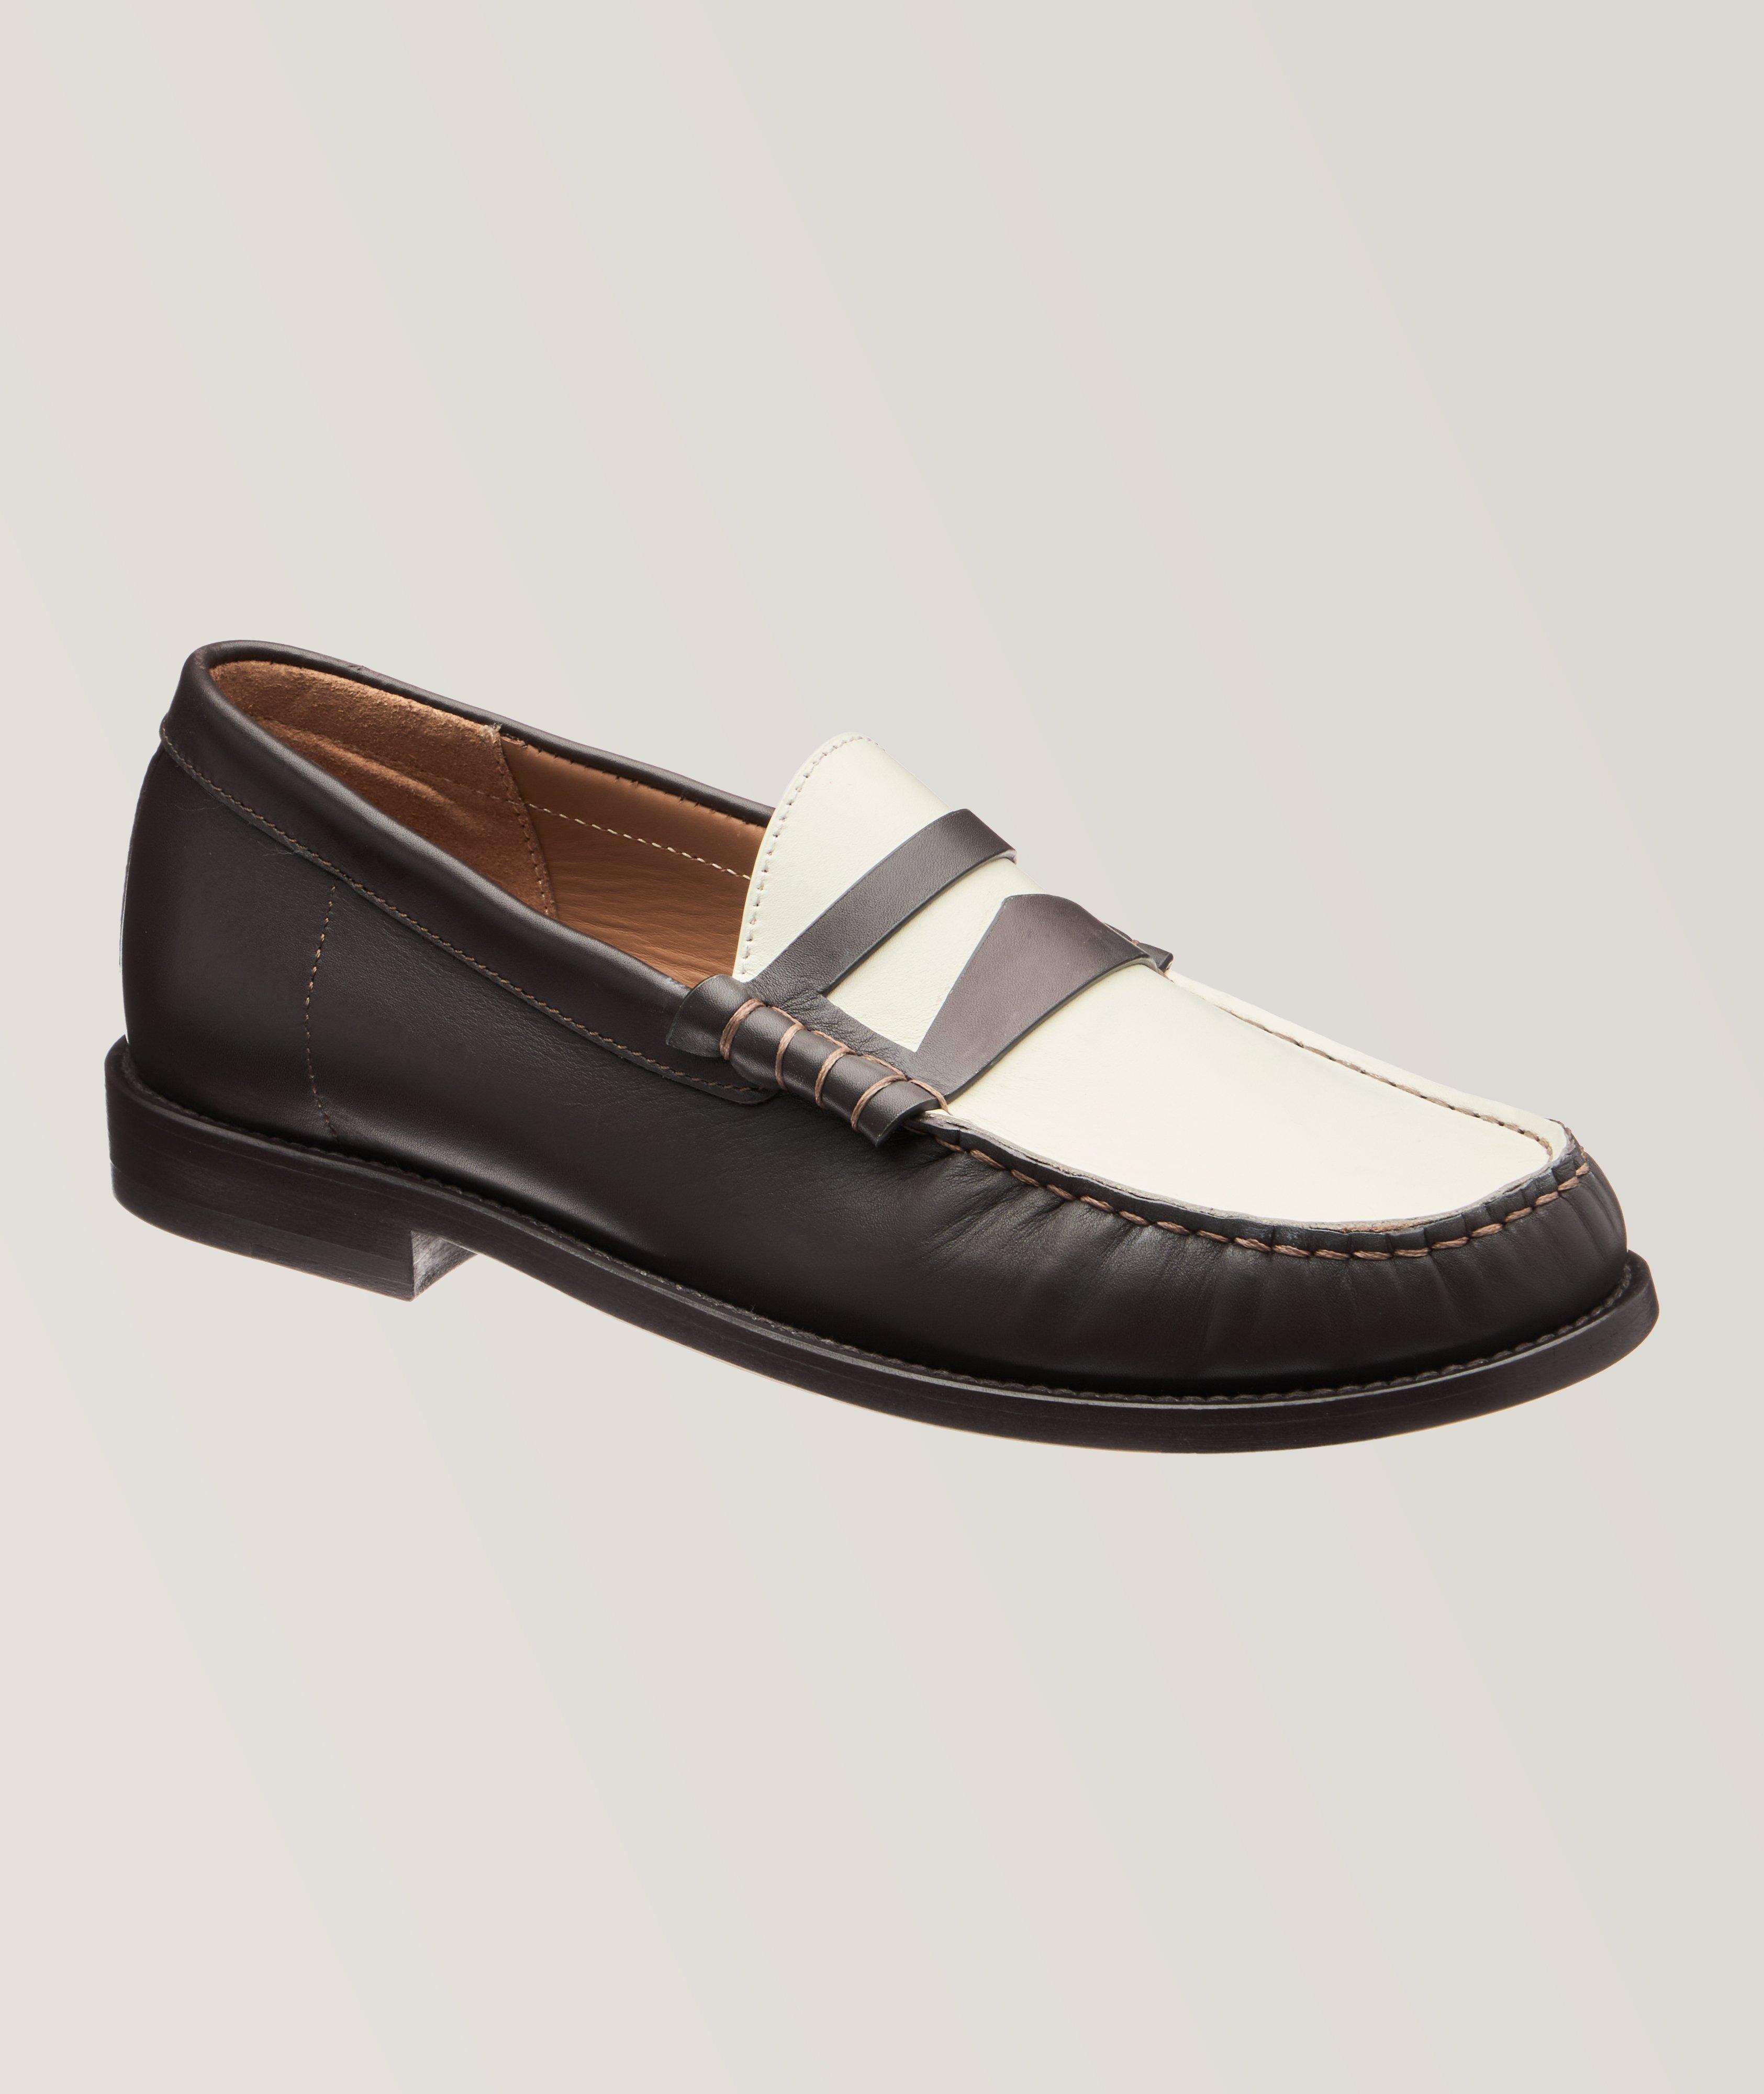 Two-Tone Leather Penny Loafers image 0